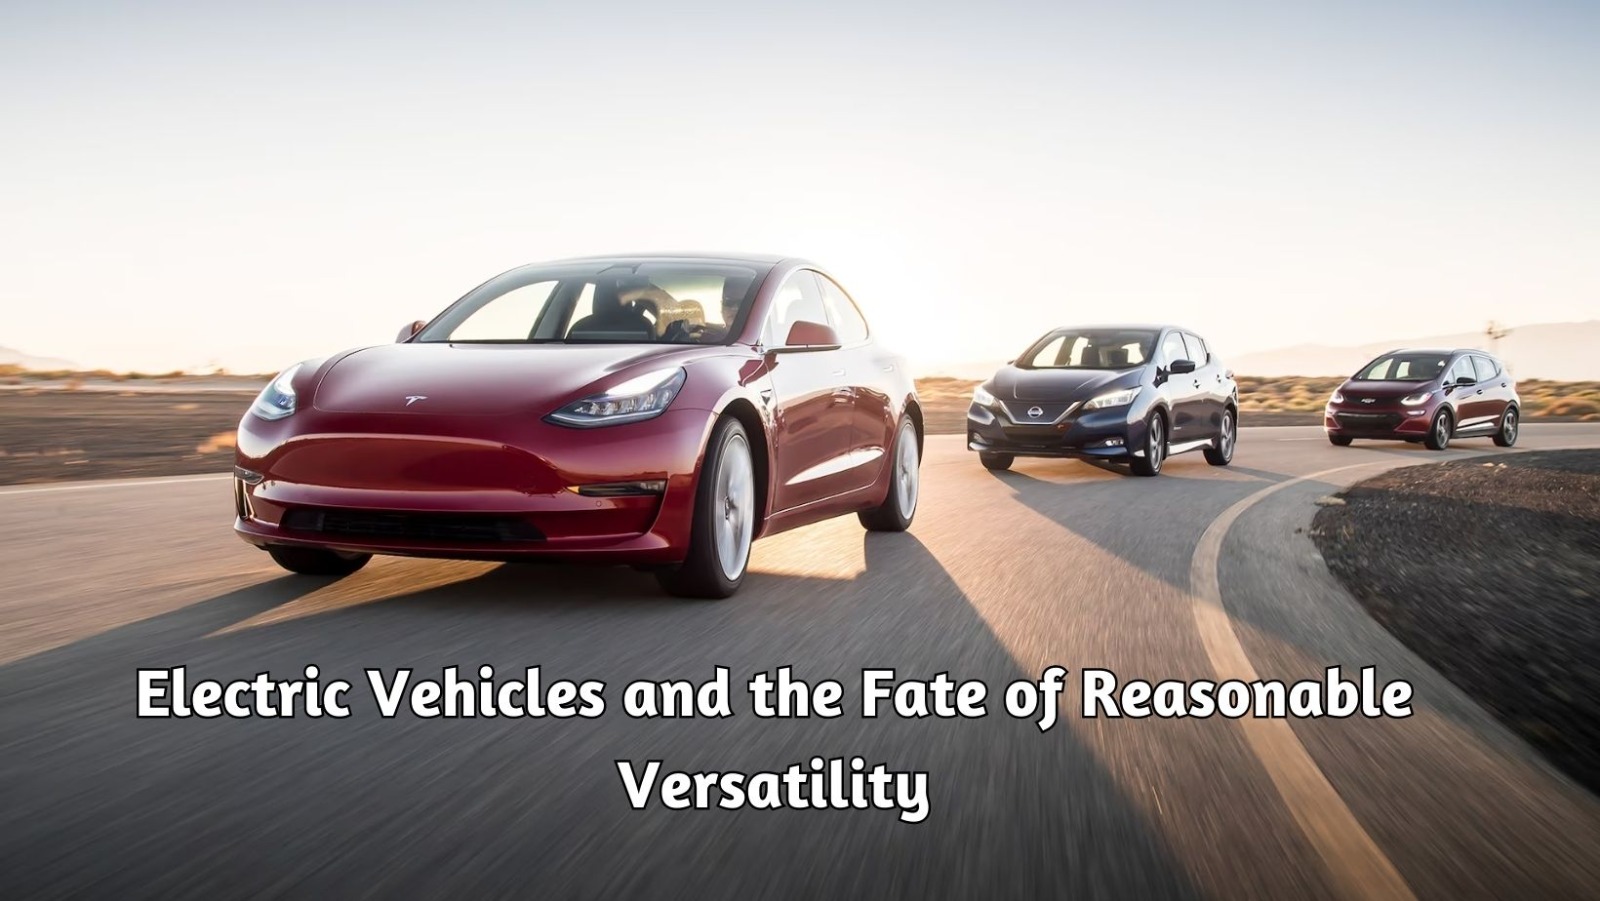 Electric Vehicles and the Fate of Reasonable Versatility